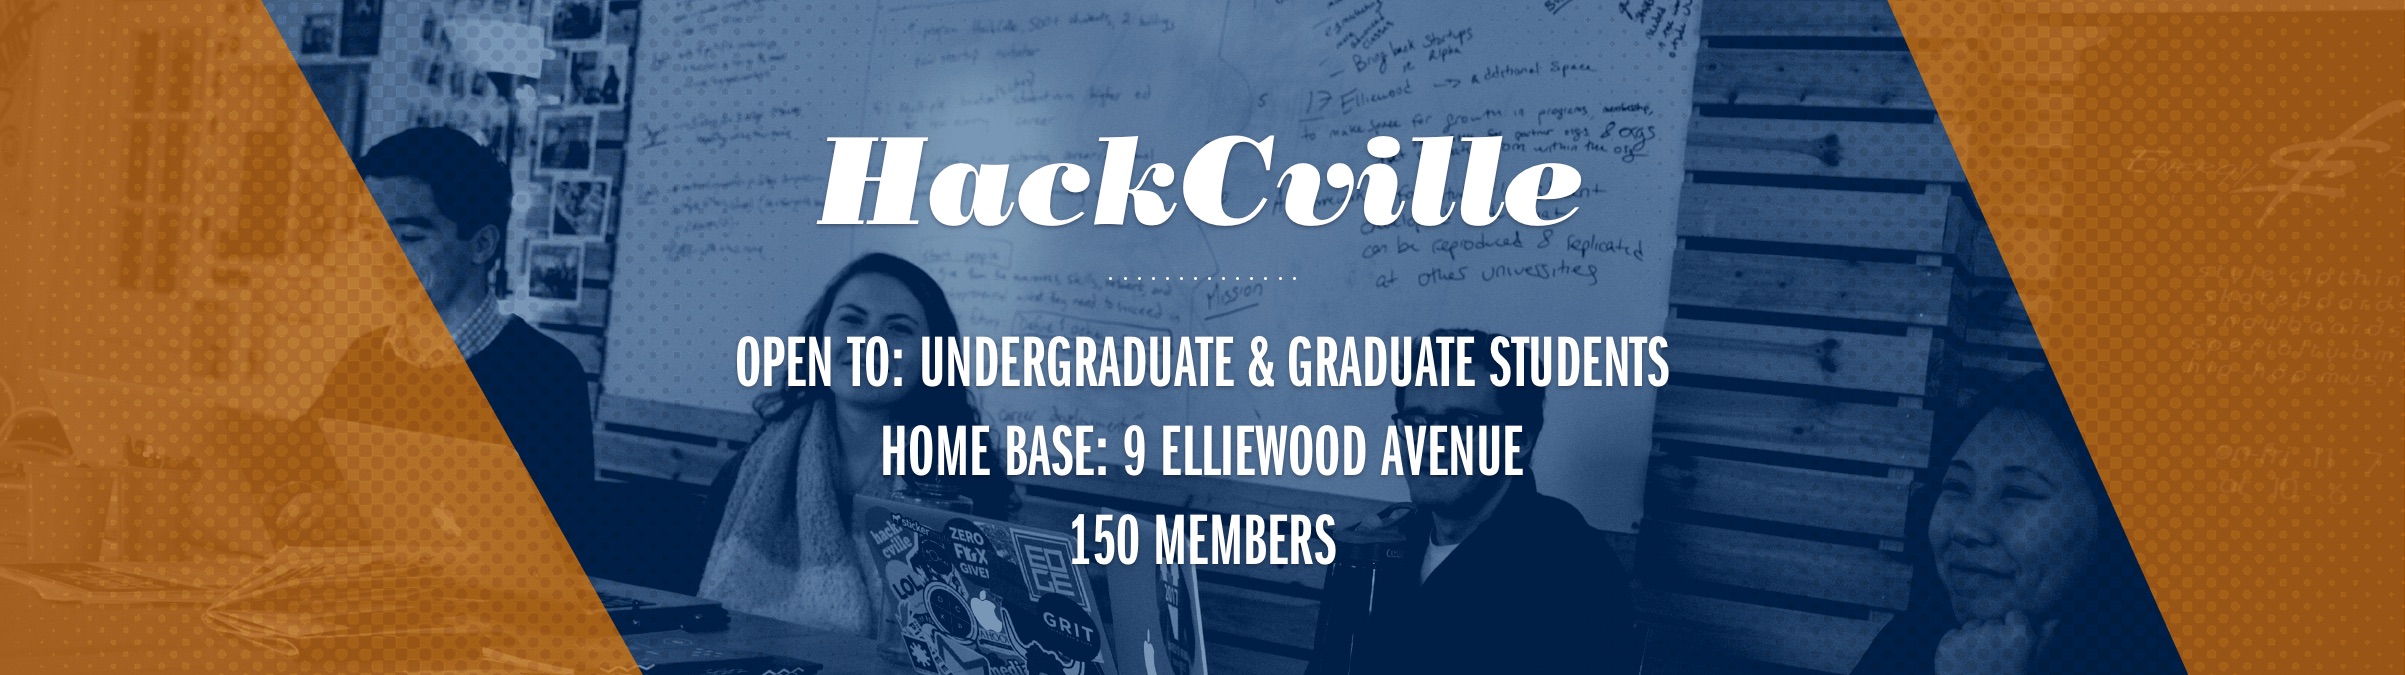 Text reads: HackCville Open to: Undergraduate & Graduate students Home Base: 9 elliewood avenue 150 members